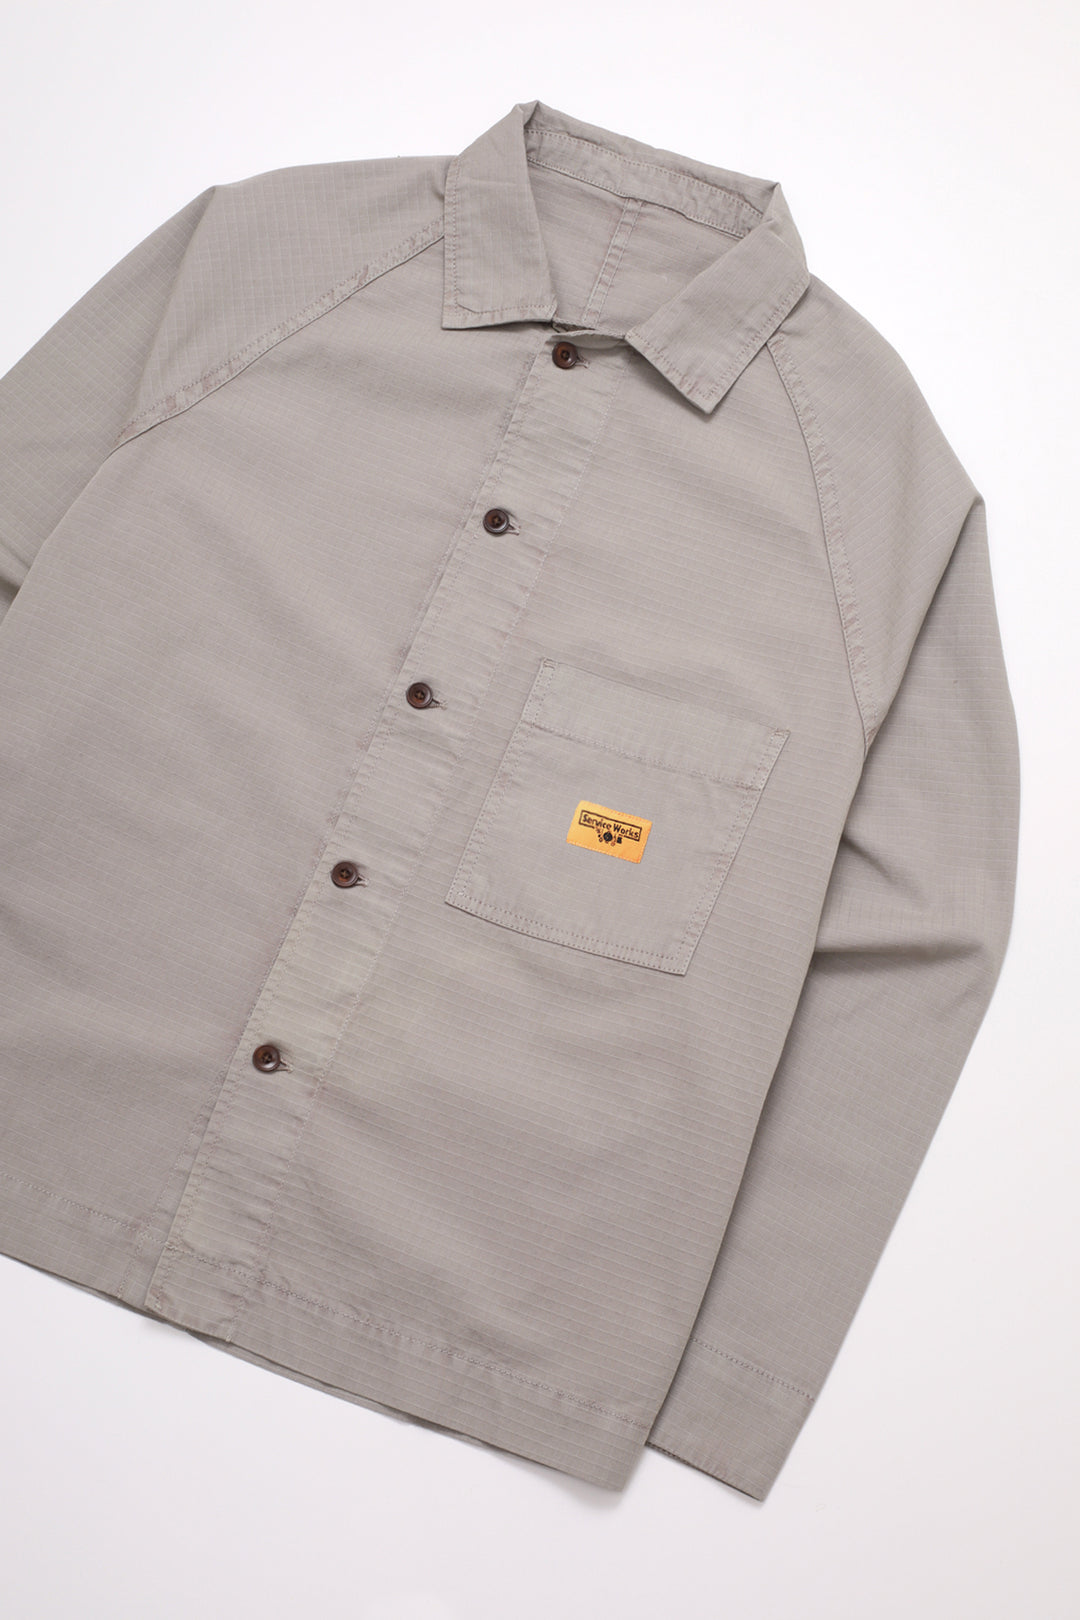 Service Works - Ripstop Front Of House Jacket - Stone